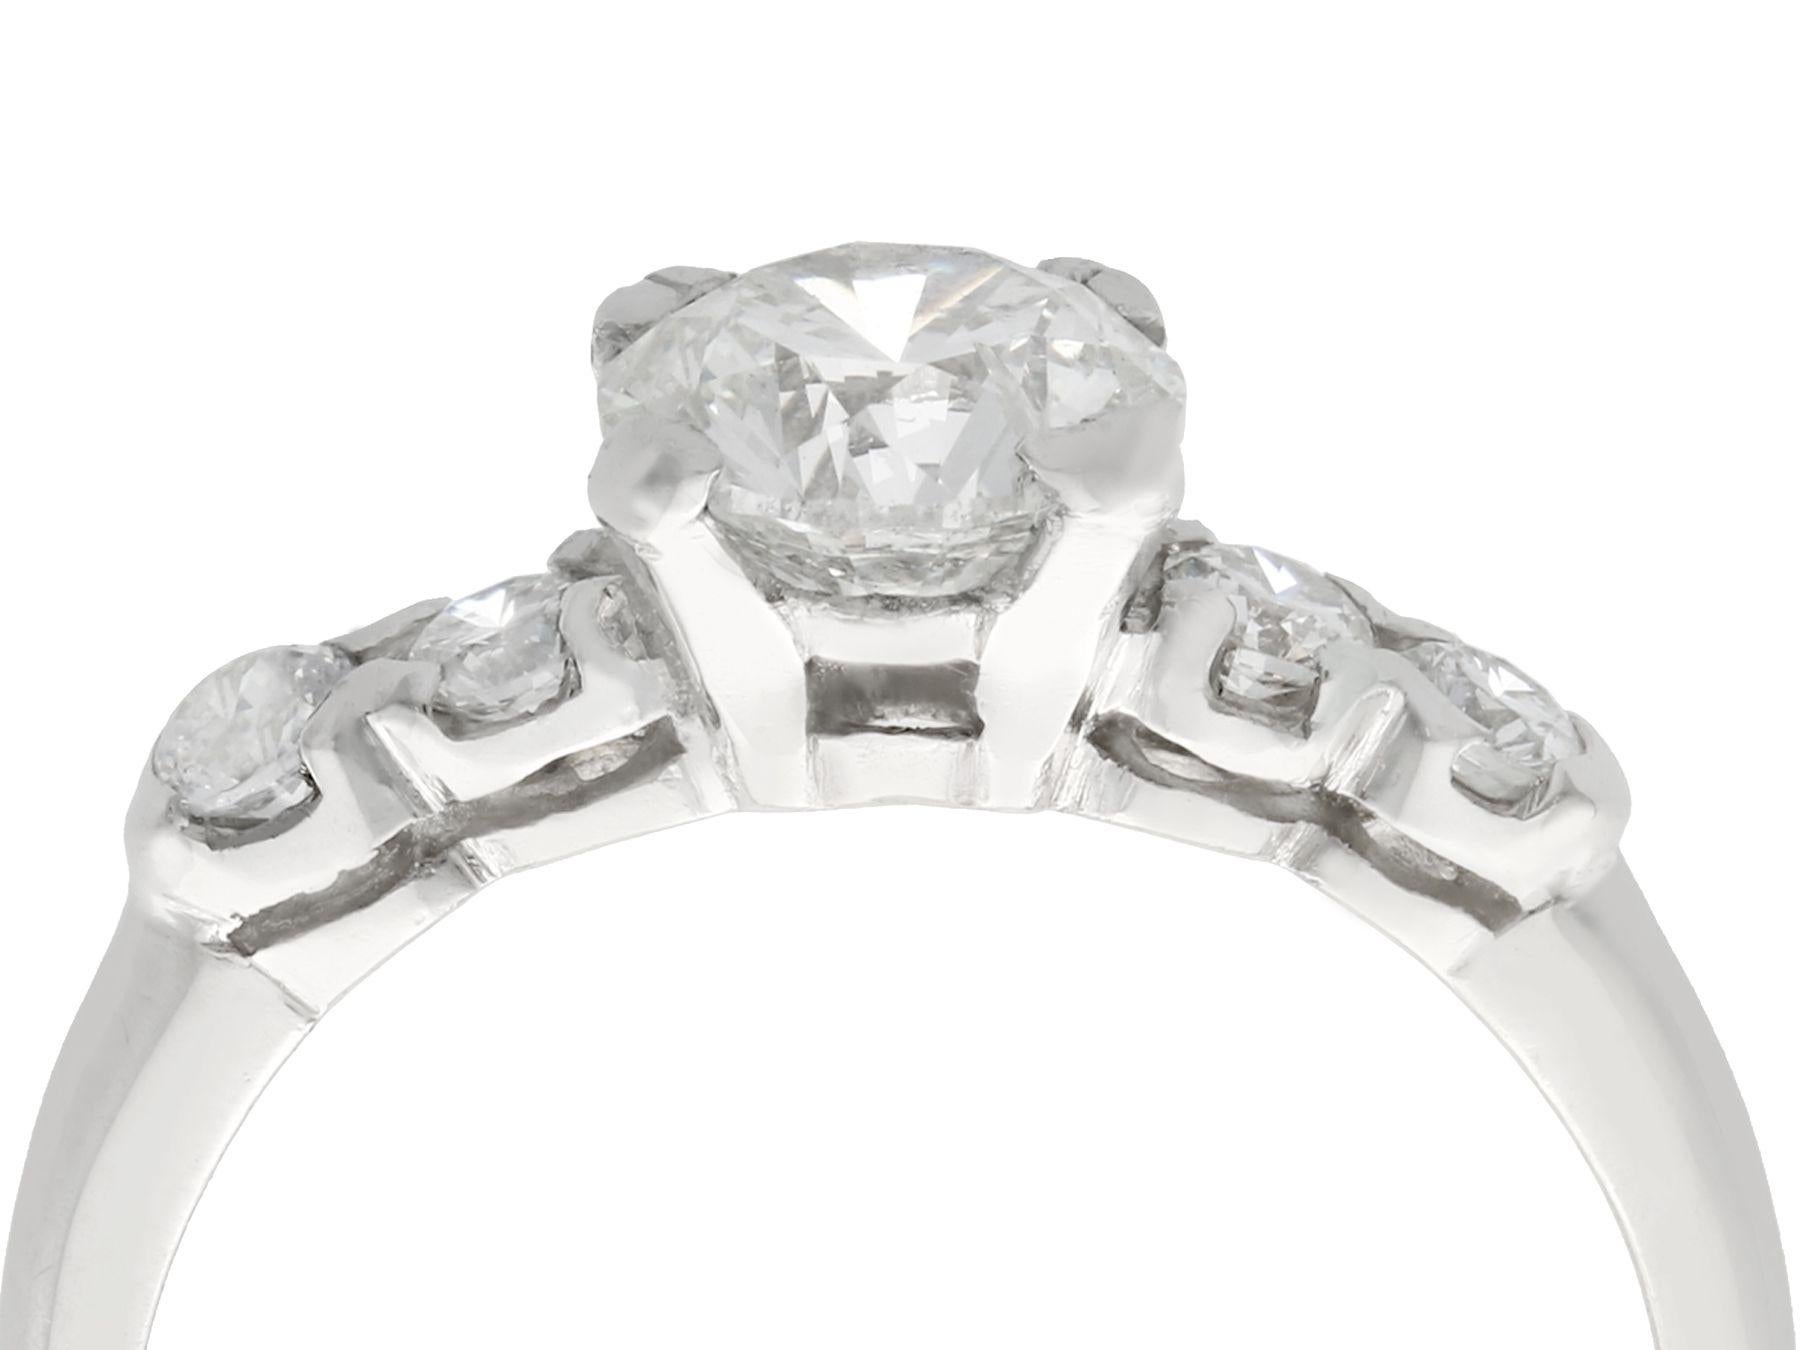 A stunning, fine and impressive vintage 1.21 carat diamond and platinum dress ring; part of our diverse range of engagement rings.

This stunning, fine and impressive vintage diamond and platinum engagement ring has been crafted in platinum.

The